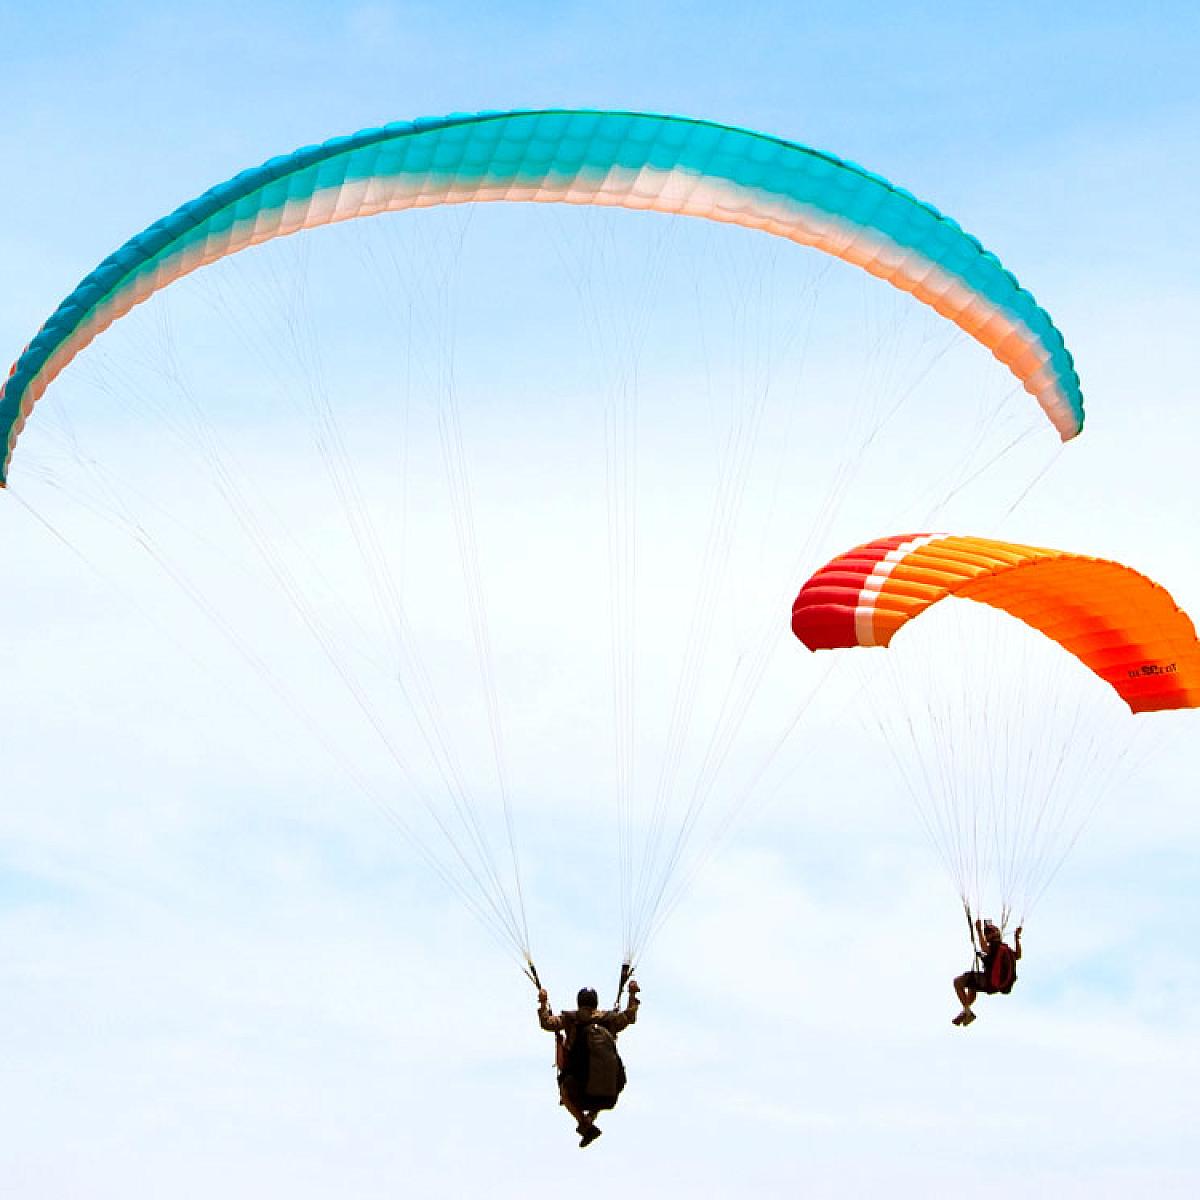 Two people paragliding. One is using a teal parasail. The other parasail is two toned orange.